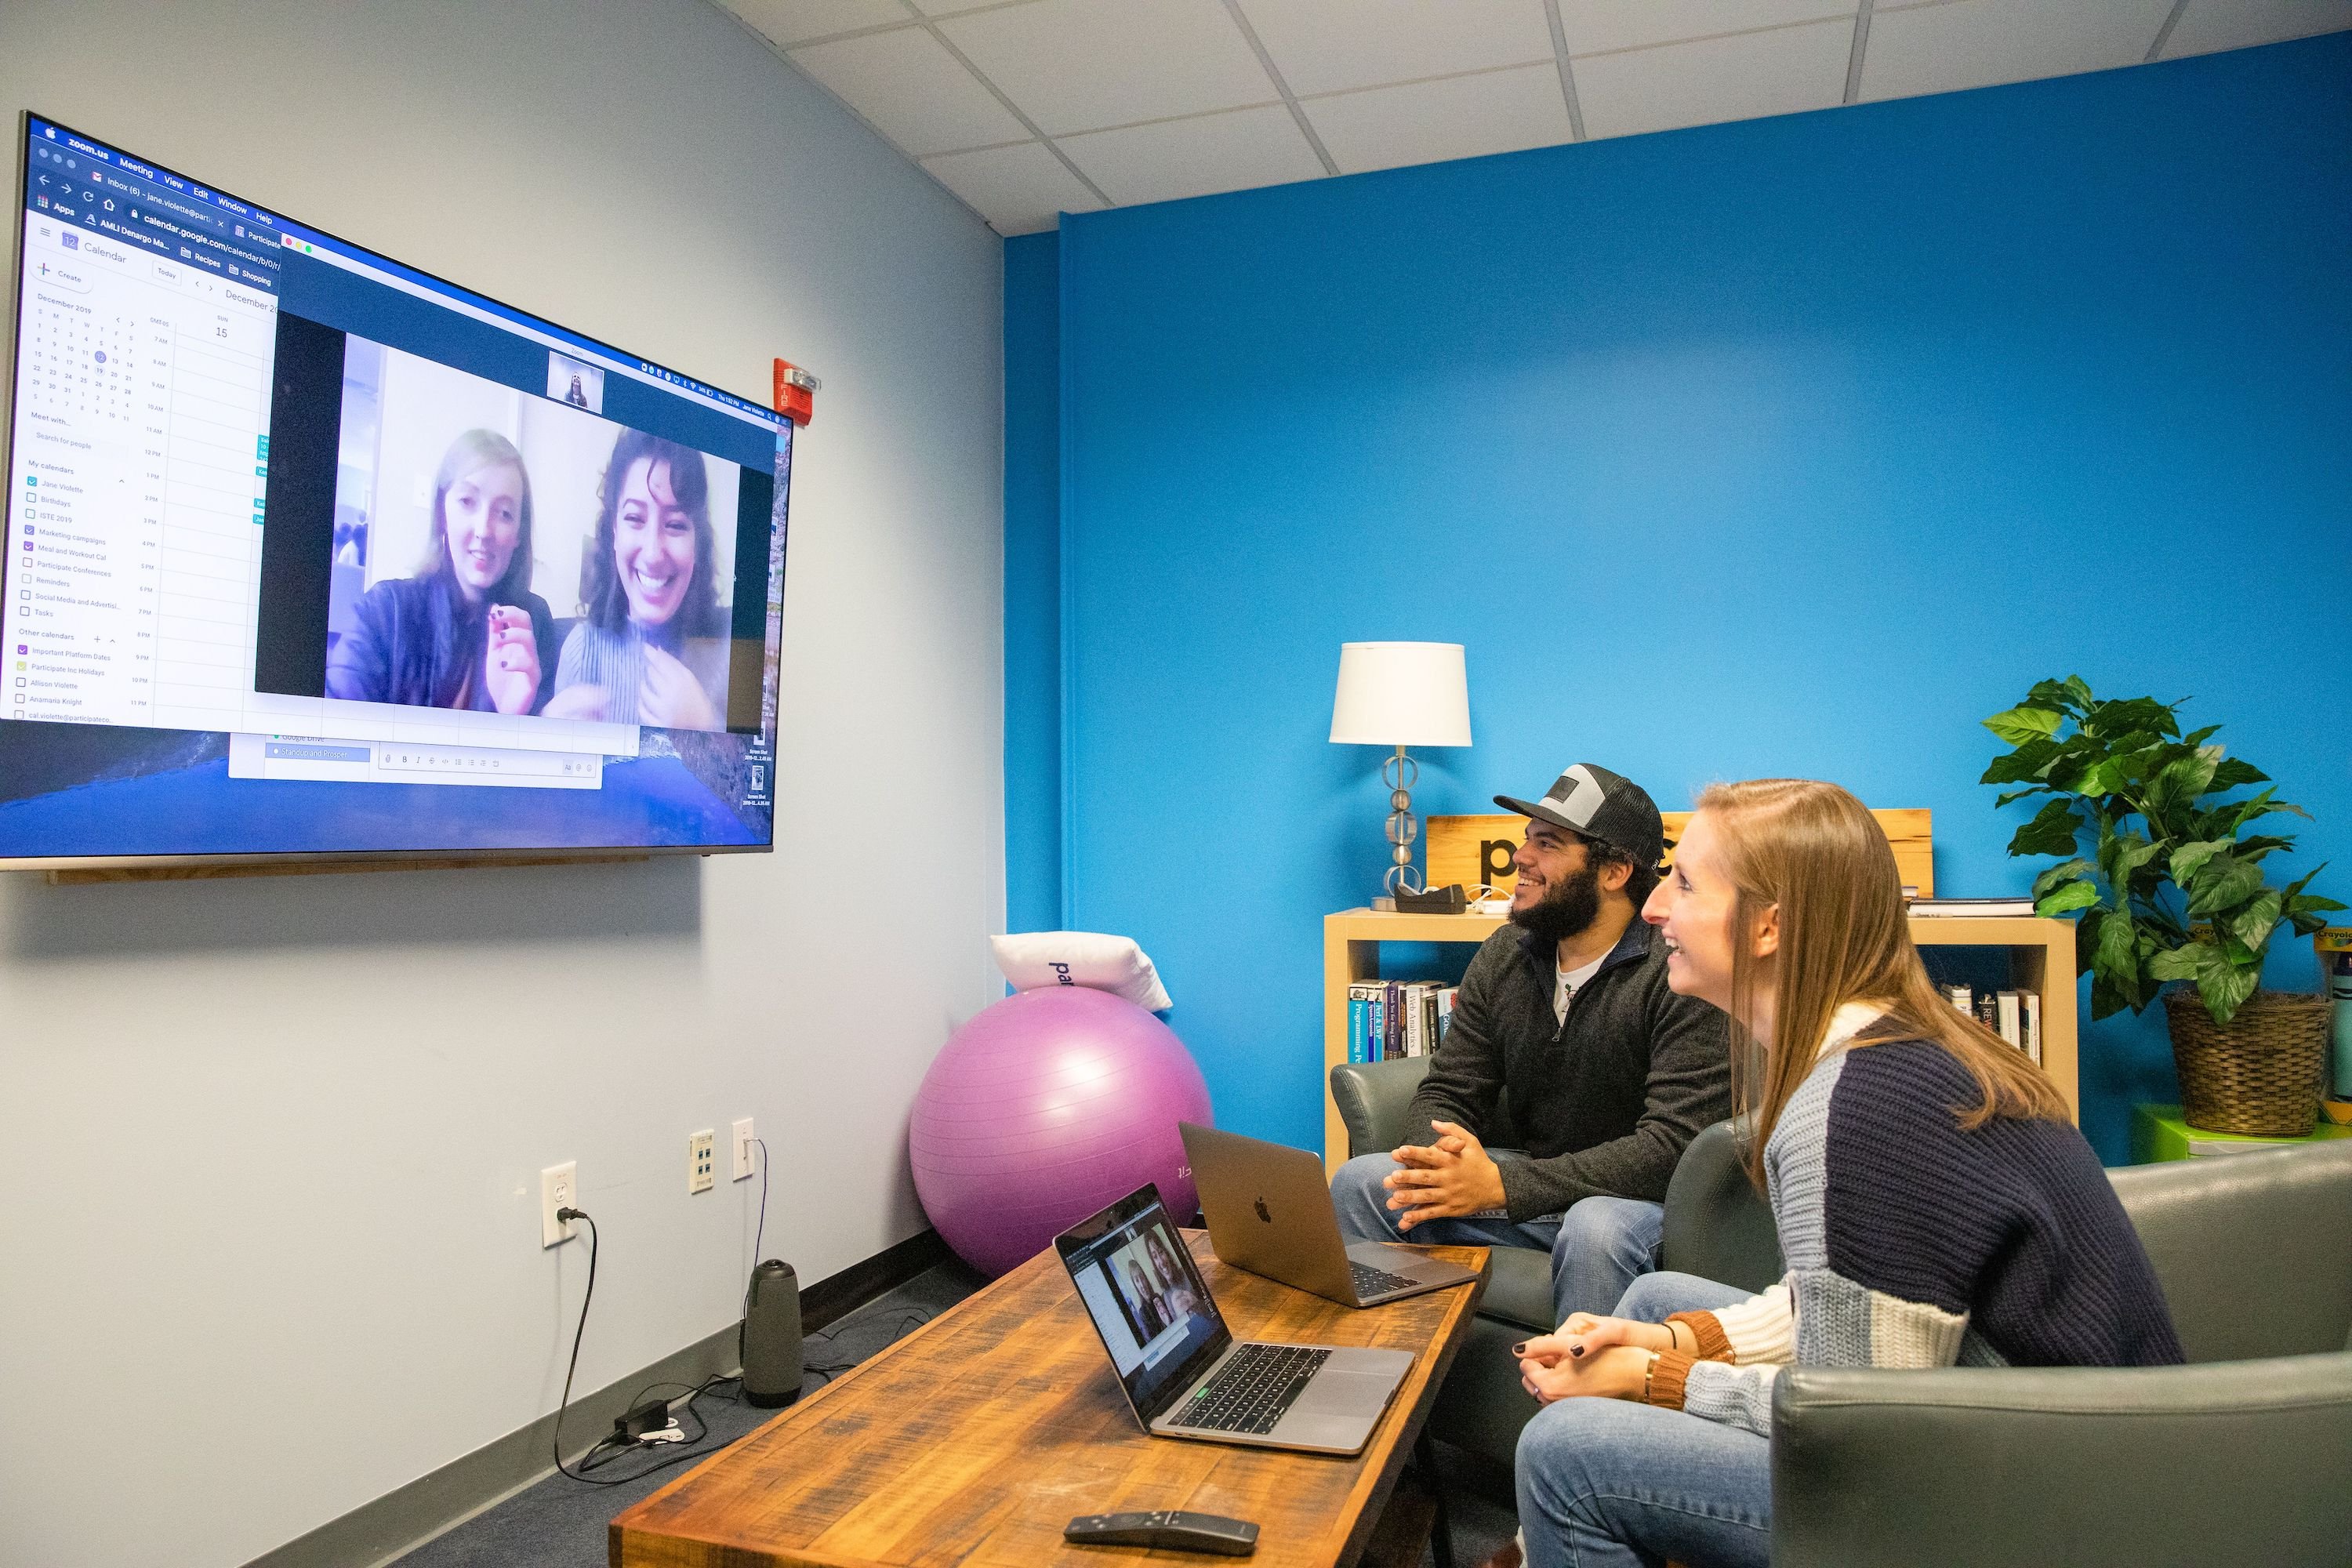 Two team members sitting in chairs smiling at a TV screen, where two other team members are shown. They are all on a video call.